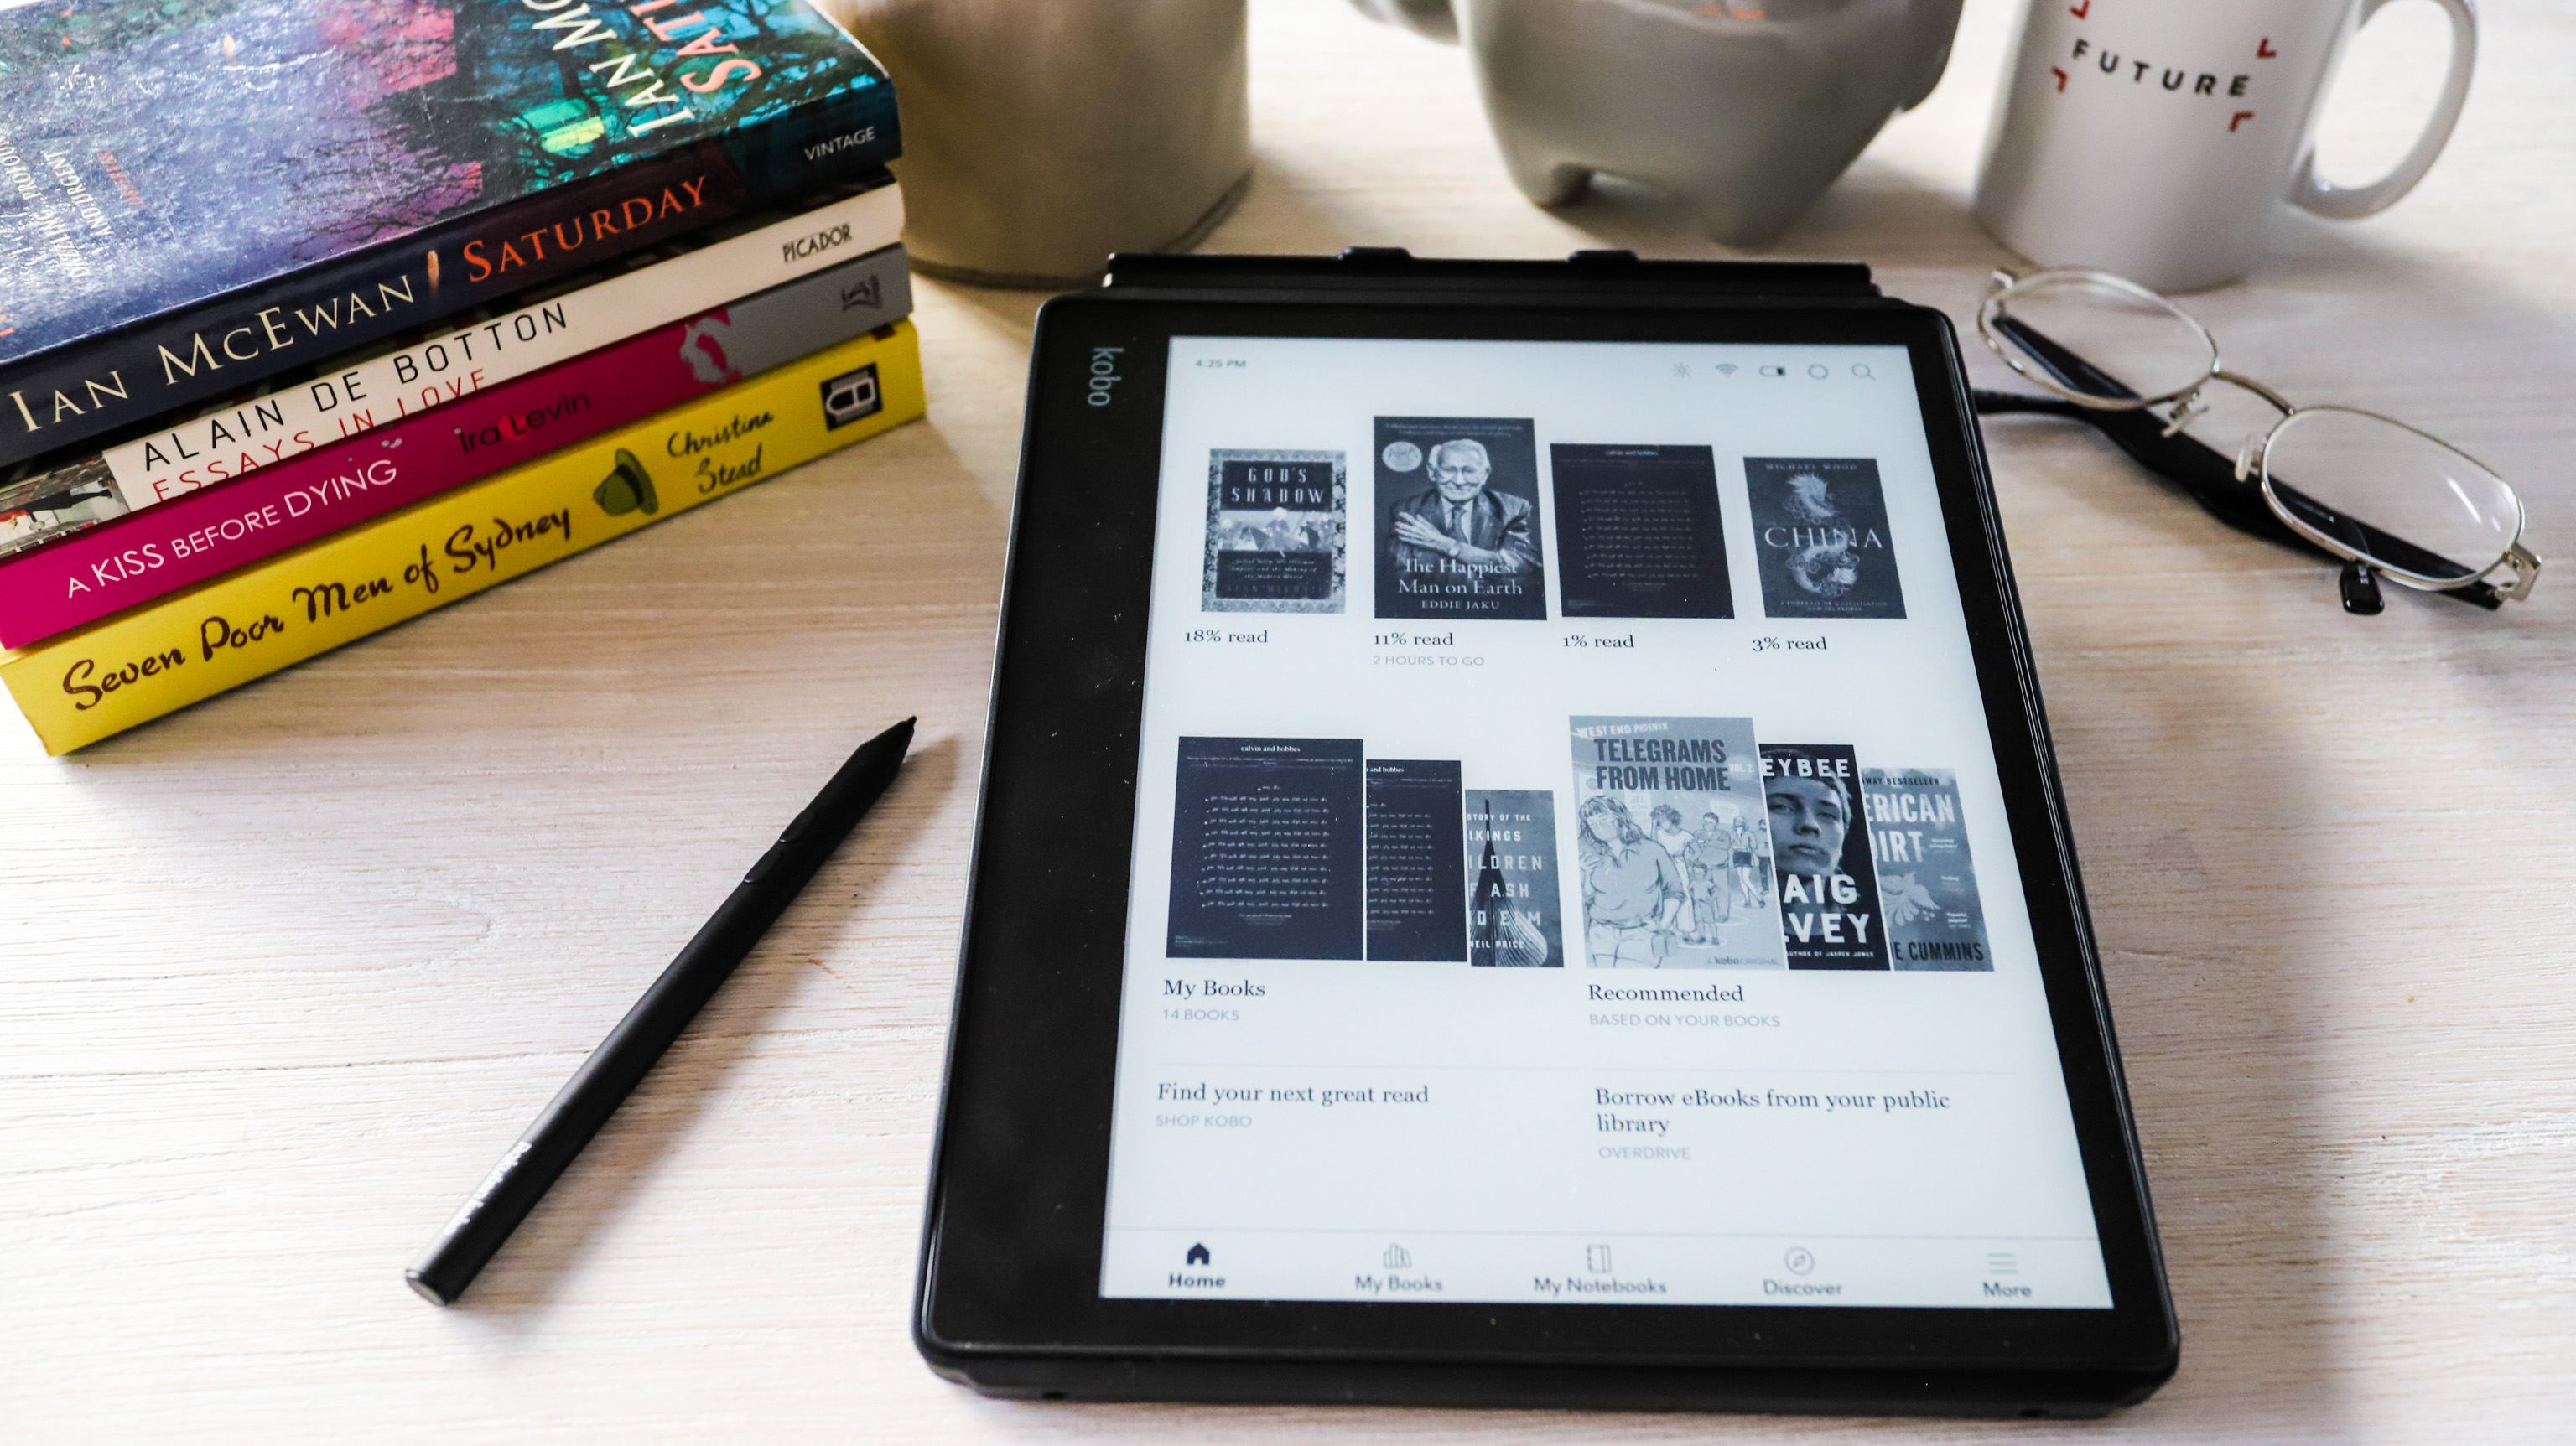 Kobo Elipsa is a 10-inch e-reader that doubles as a notebook with stylus